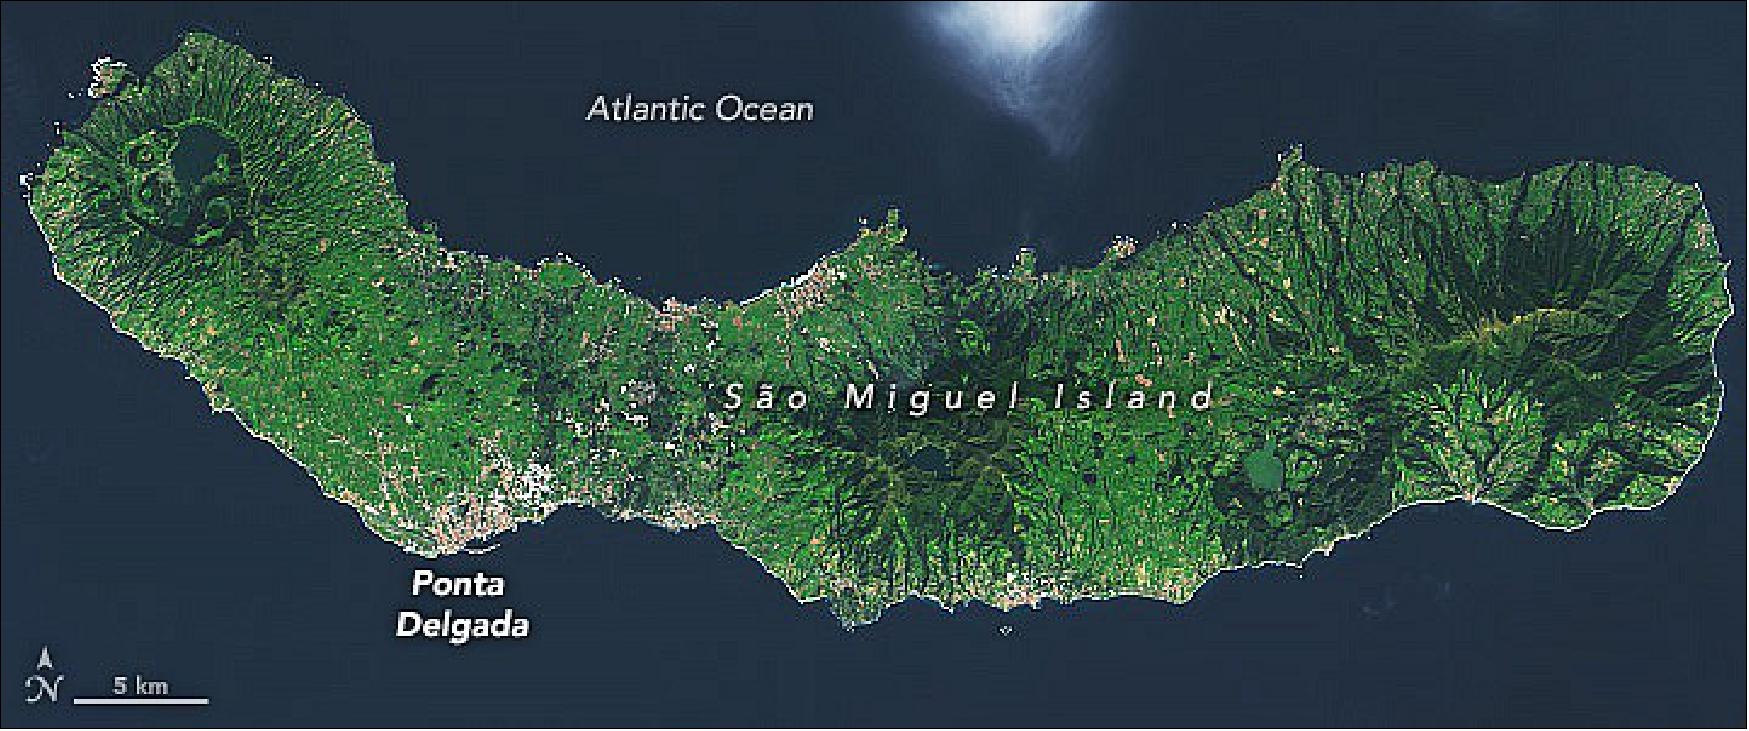 Figure 19: The most volcanically active island is São Miguel, shown in these images acquired on December 9, 2018, by the Operational Land Imager (OLI) on Landsat-8 (image credit: NASA Earth Observatory images by Lauren Dauphin, using Landsat data from the U.S. Geological Survey. Story by Sara E. Pratt)